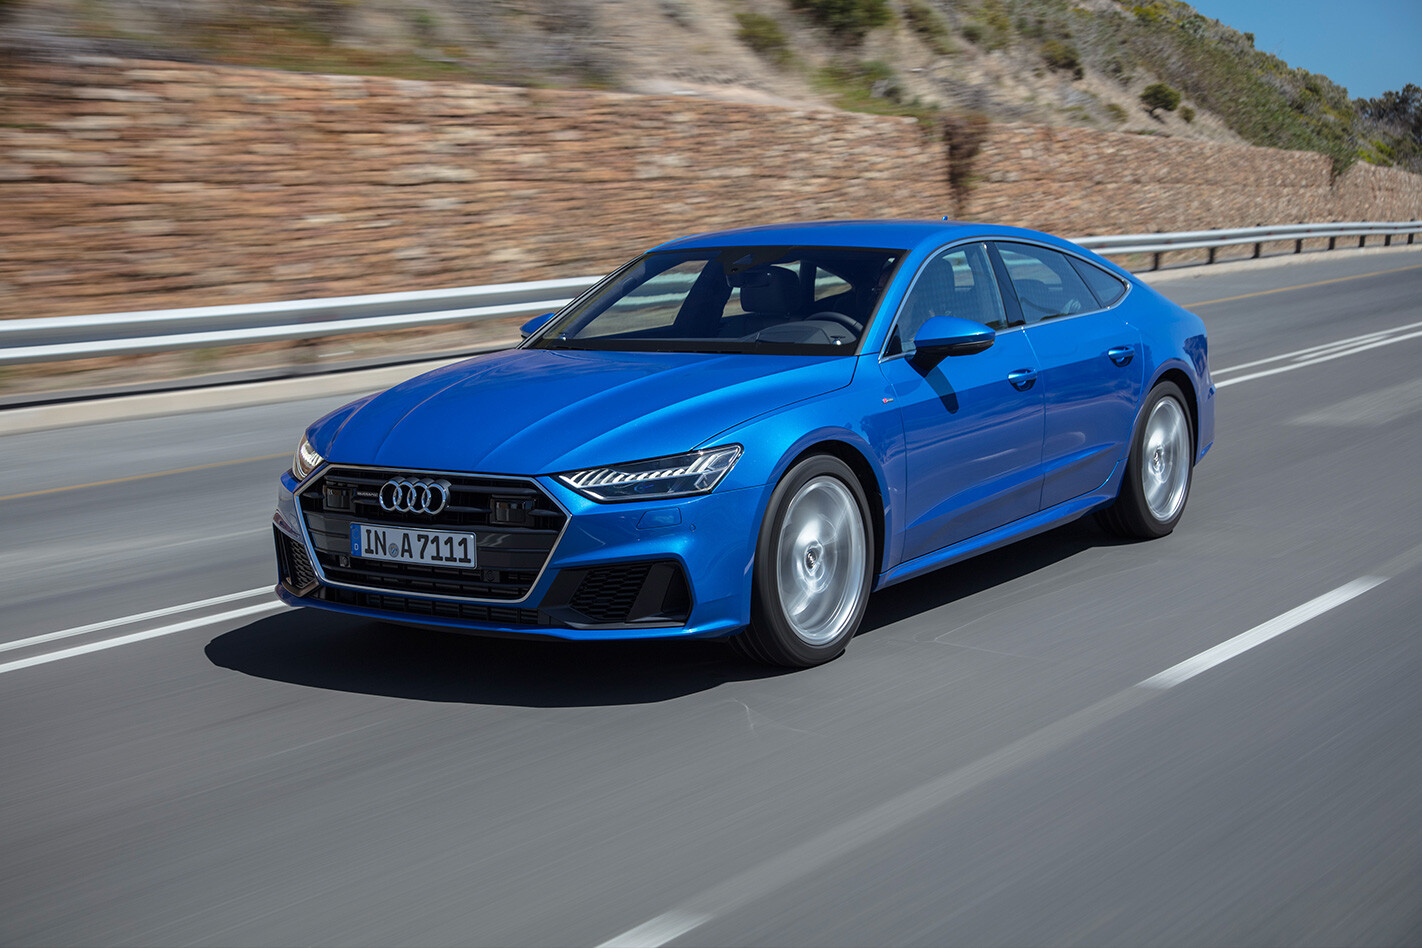 2019 Audi A7 Sportback pricing and features